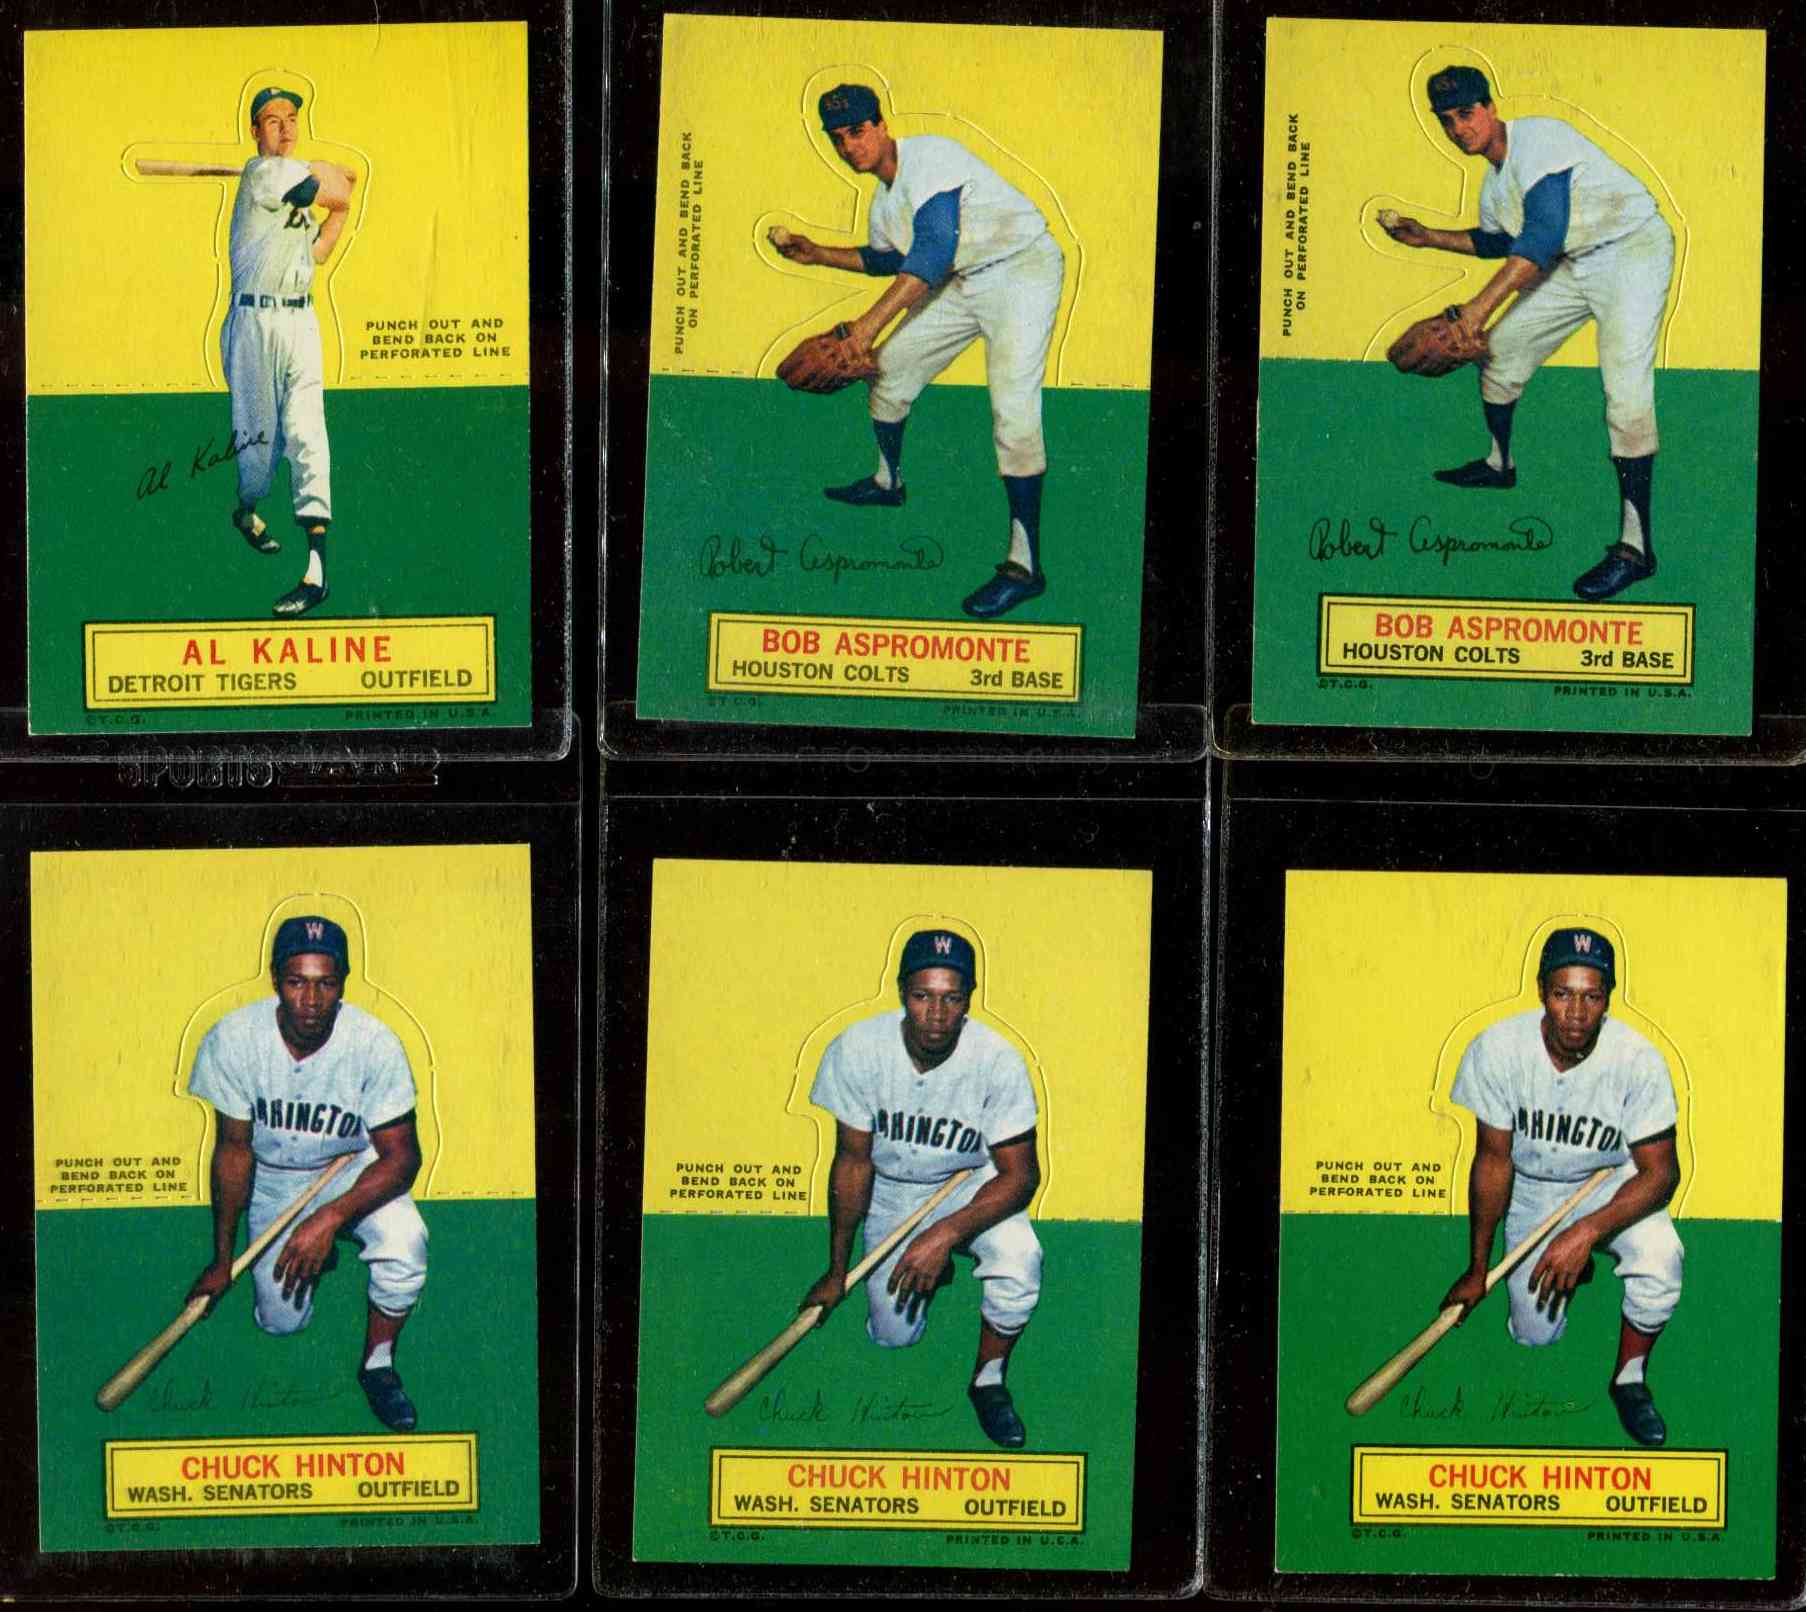 1964 Topps Stand-Ups/Standups - Bob Aspromonte (Houston Colts/Astros) Baseball cards value